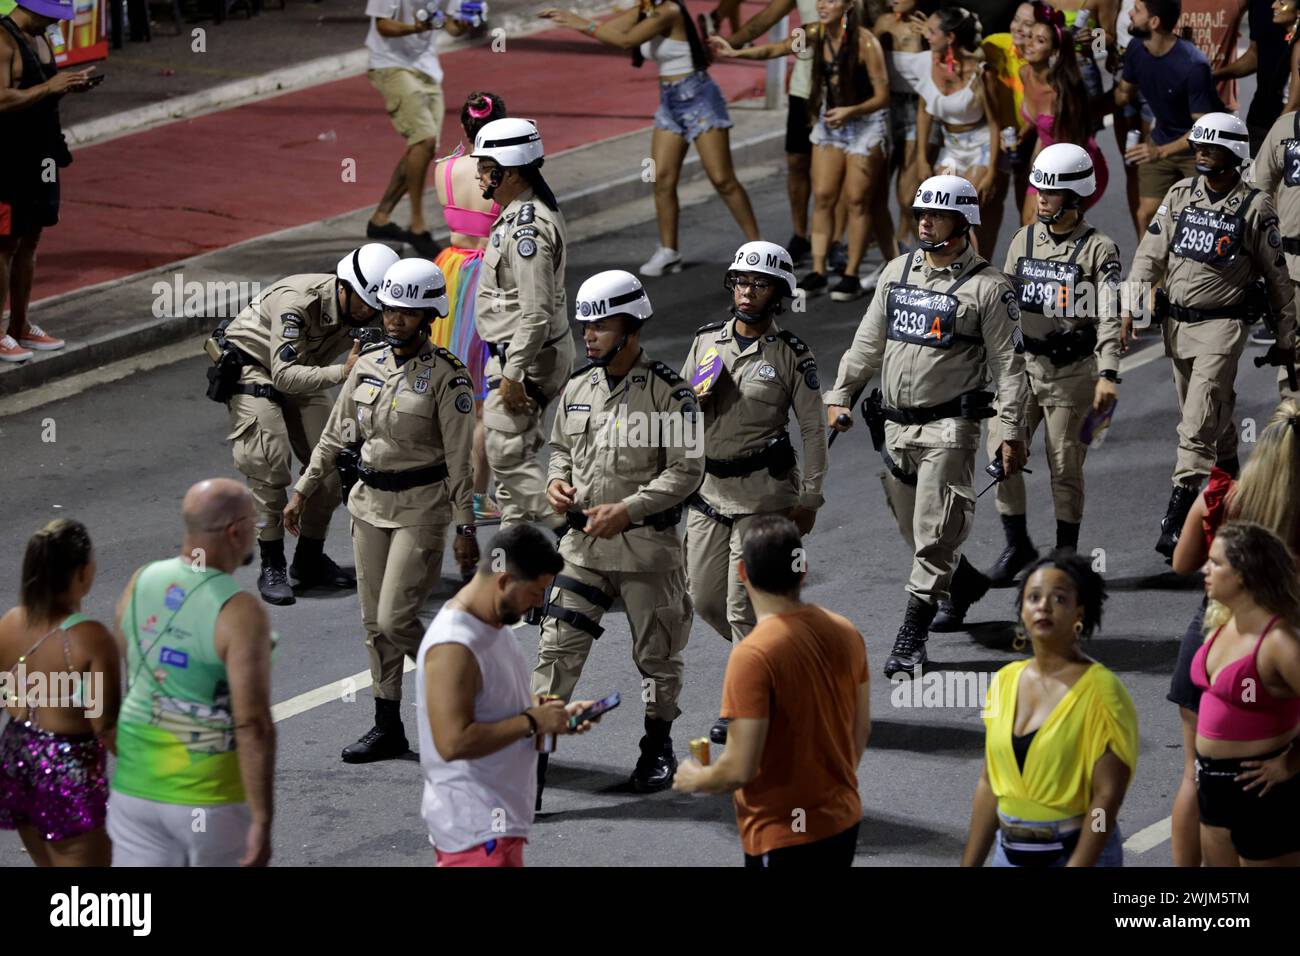 Bahia military police at carnival salvador, bahia, brazil - february 10, 2024: Bahia military police officers seen during the carnival in the city of Salvador. SALVADOR BAHIA BRAZIL Copyright: xJoaxSouzax 080224JOA4315320 Stock Photo